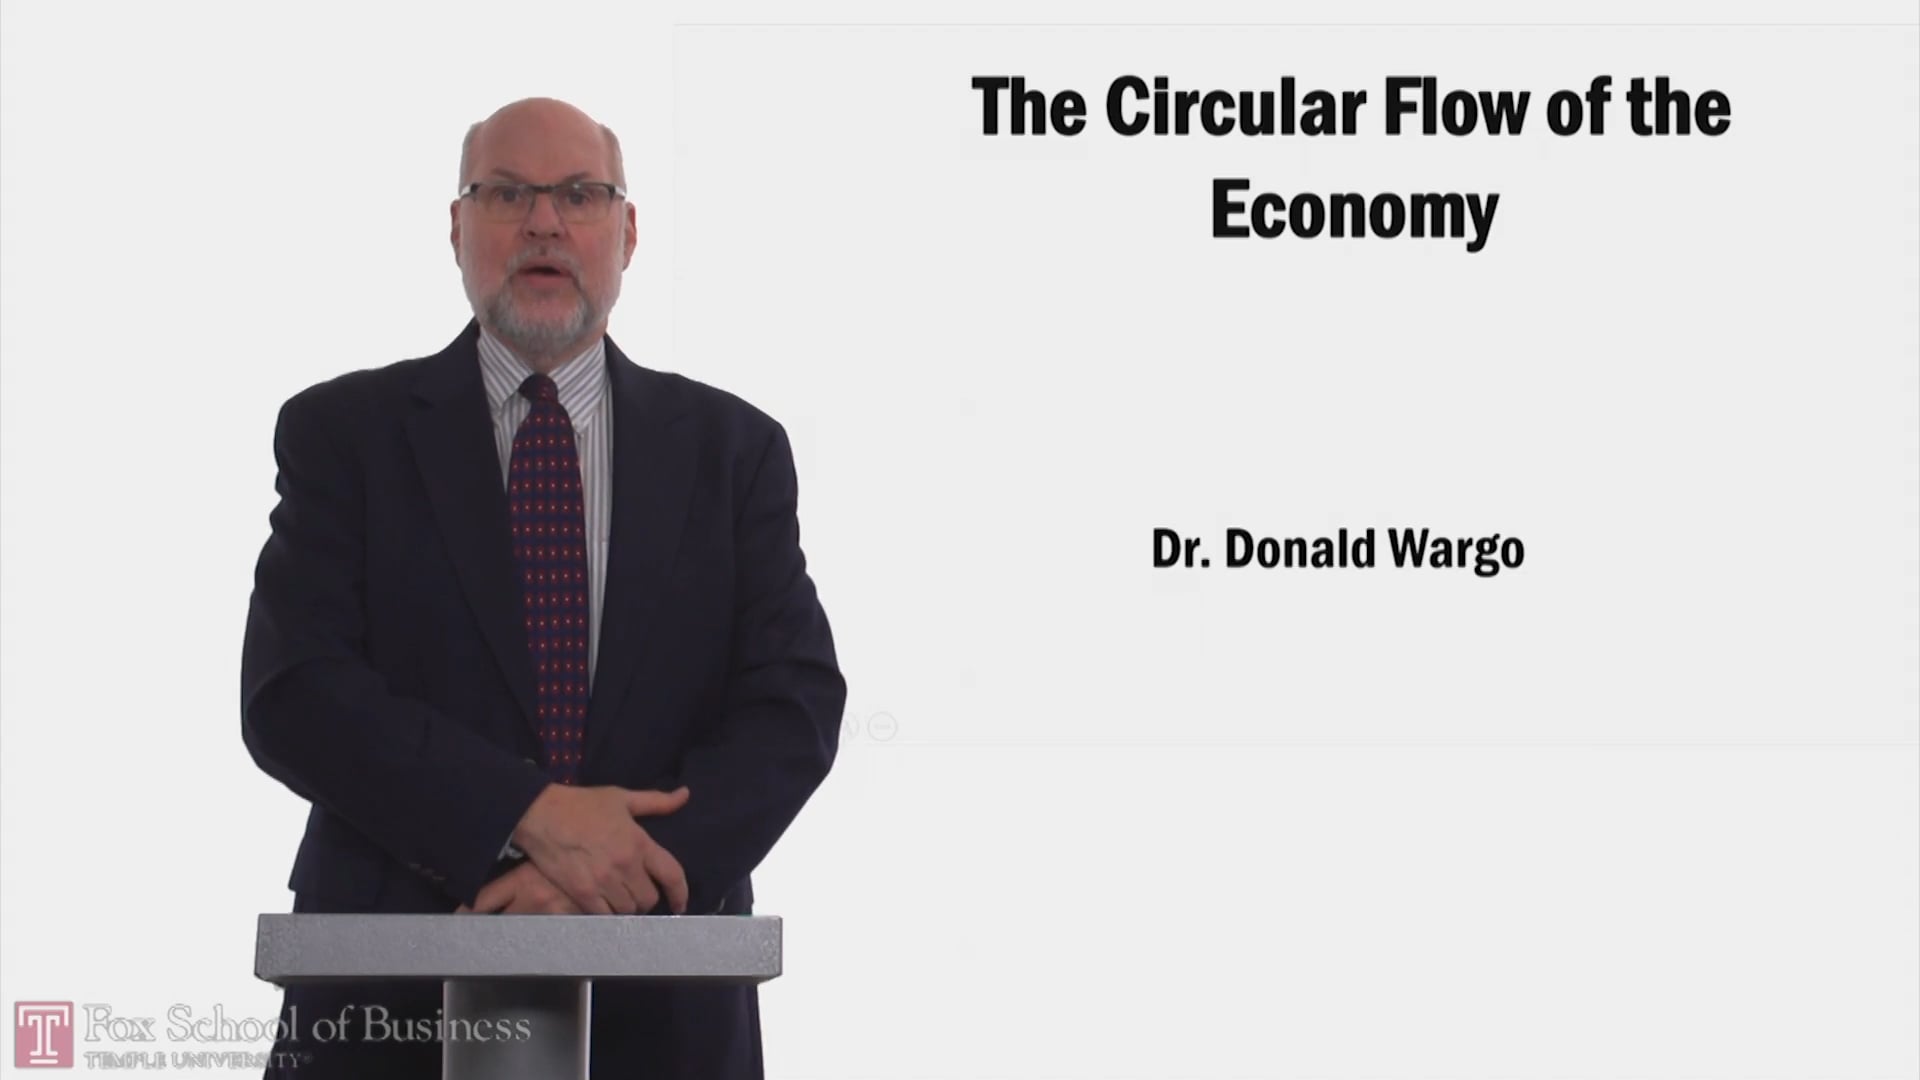 The Circular Flow of the Economy